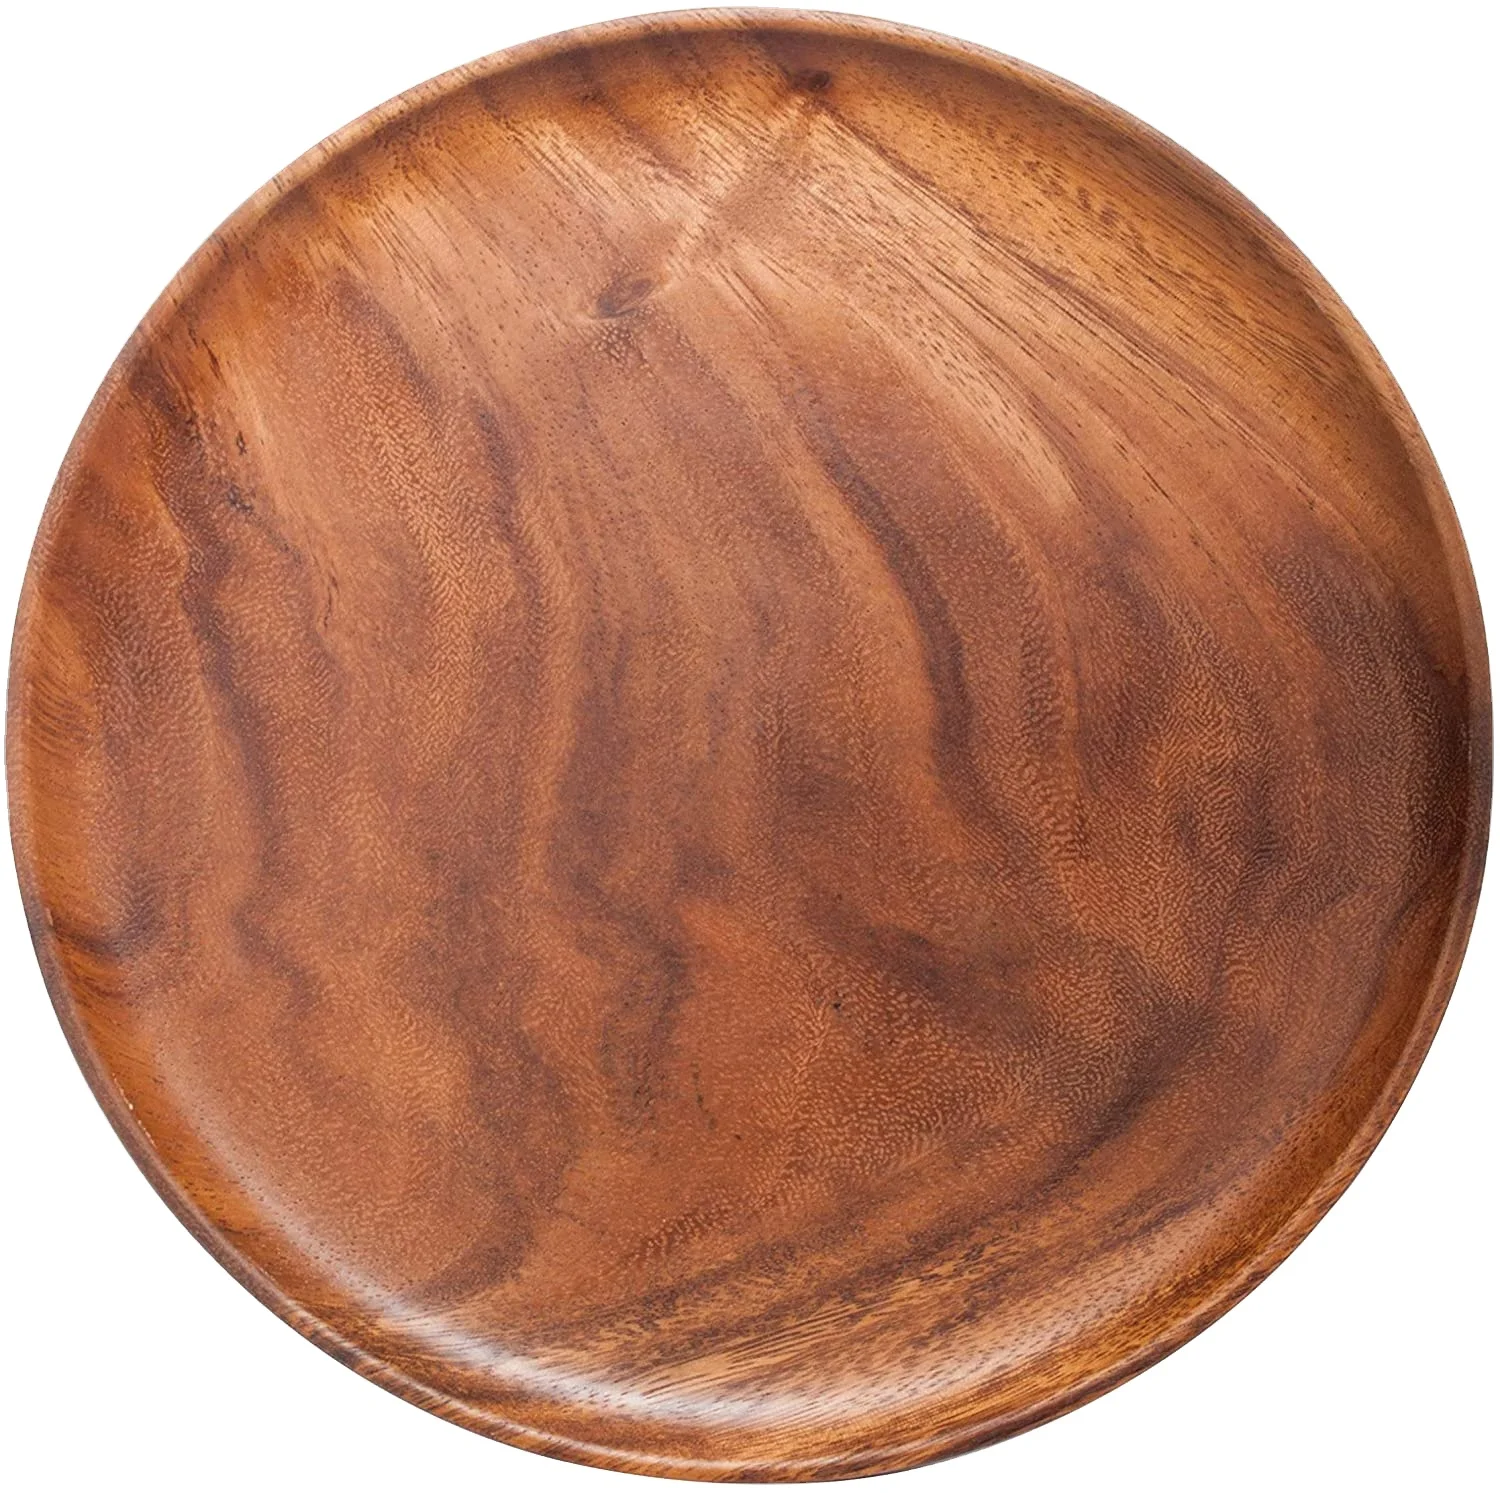 

11in X 0.79in Easy Cleaning & Lightweight for Dishes Snack, Dessert,Wood Plates Acacia WoodPlate, Natural